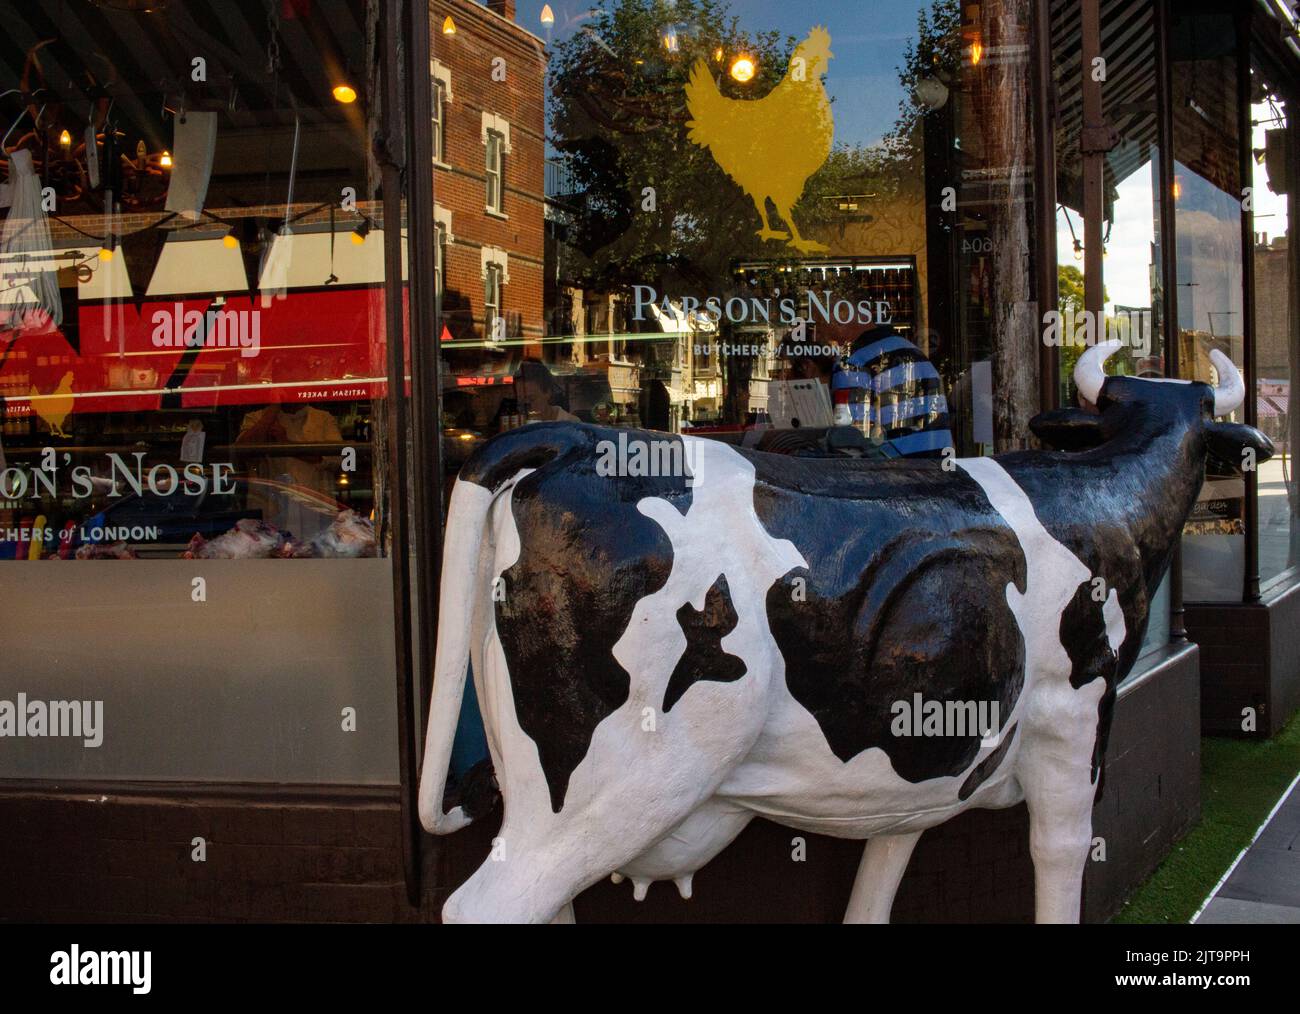 Life sized cow outside the Parson's Nose an upmarket butcher's shop in West London Stock Photo